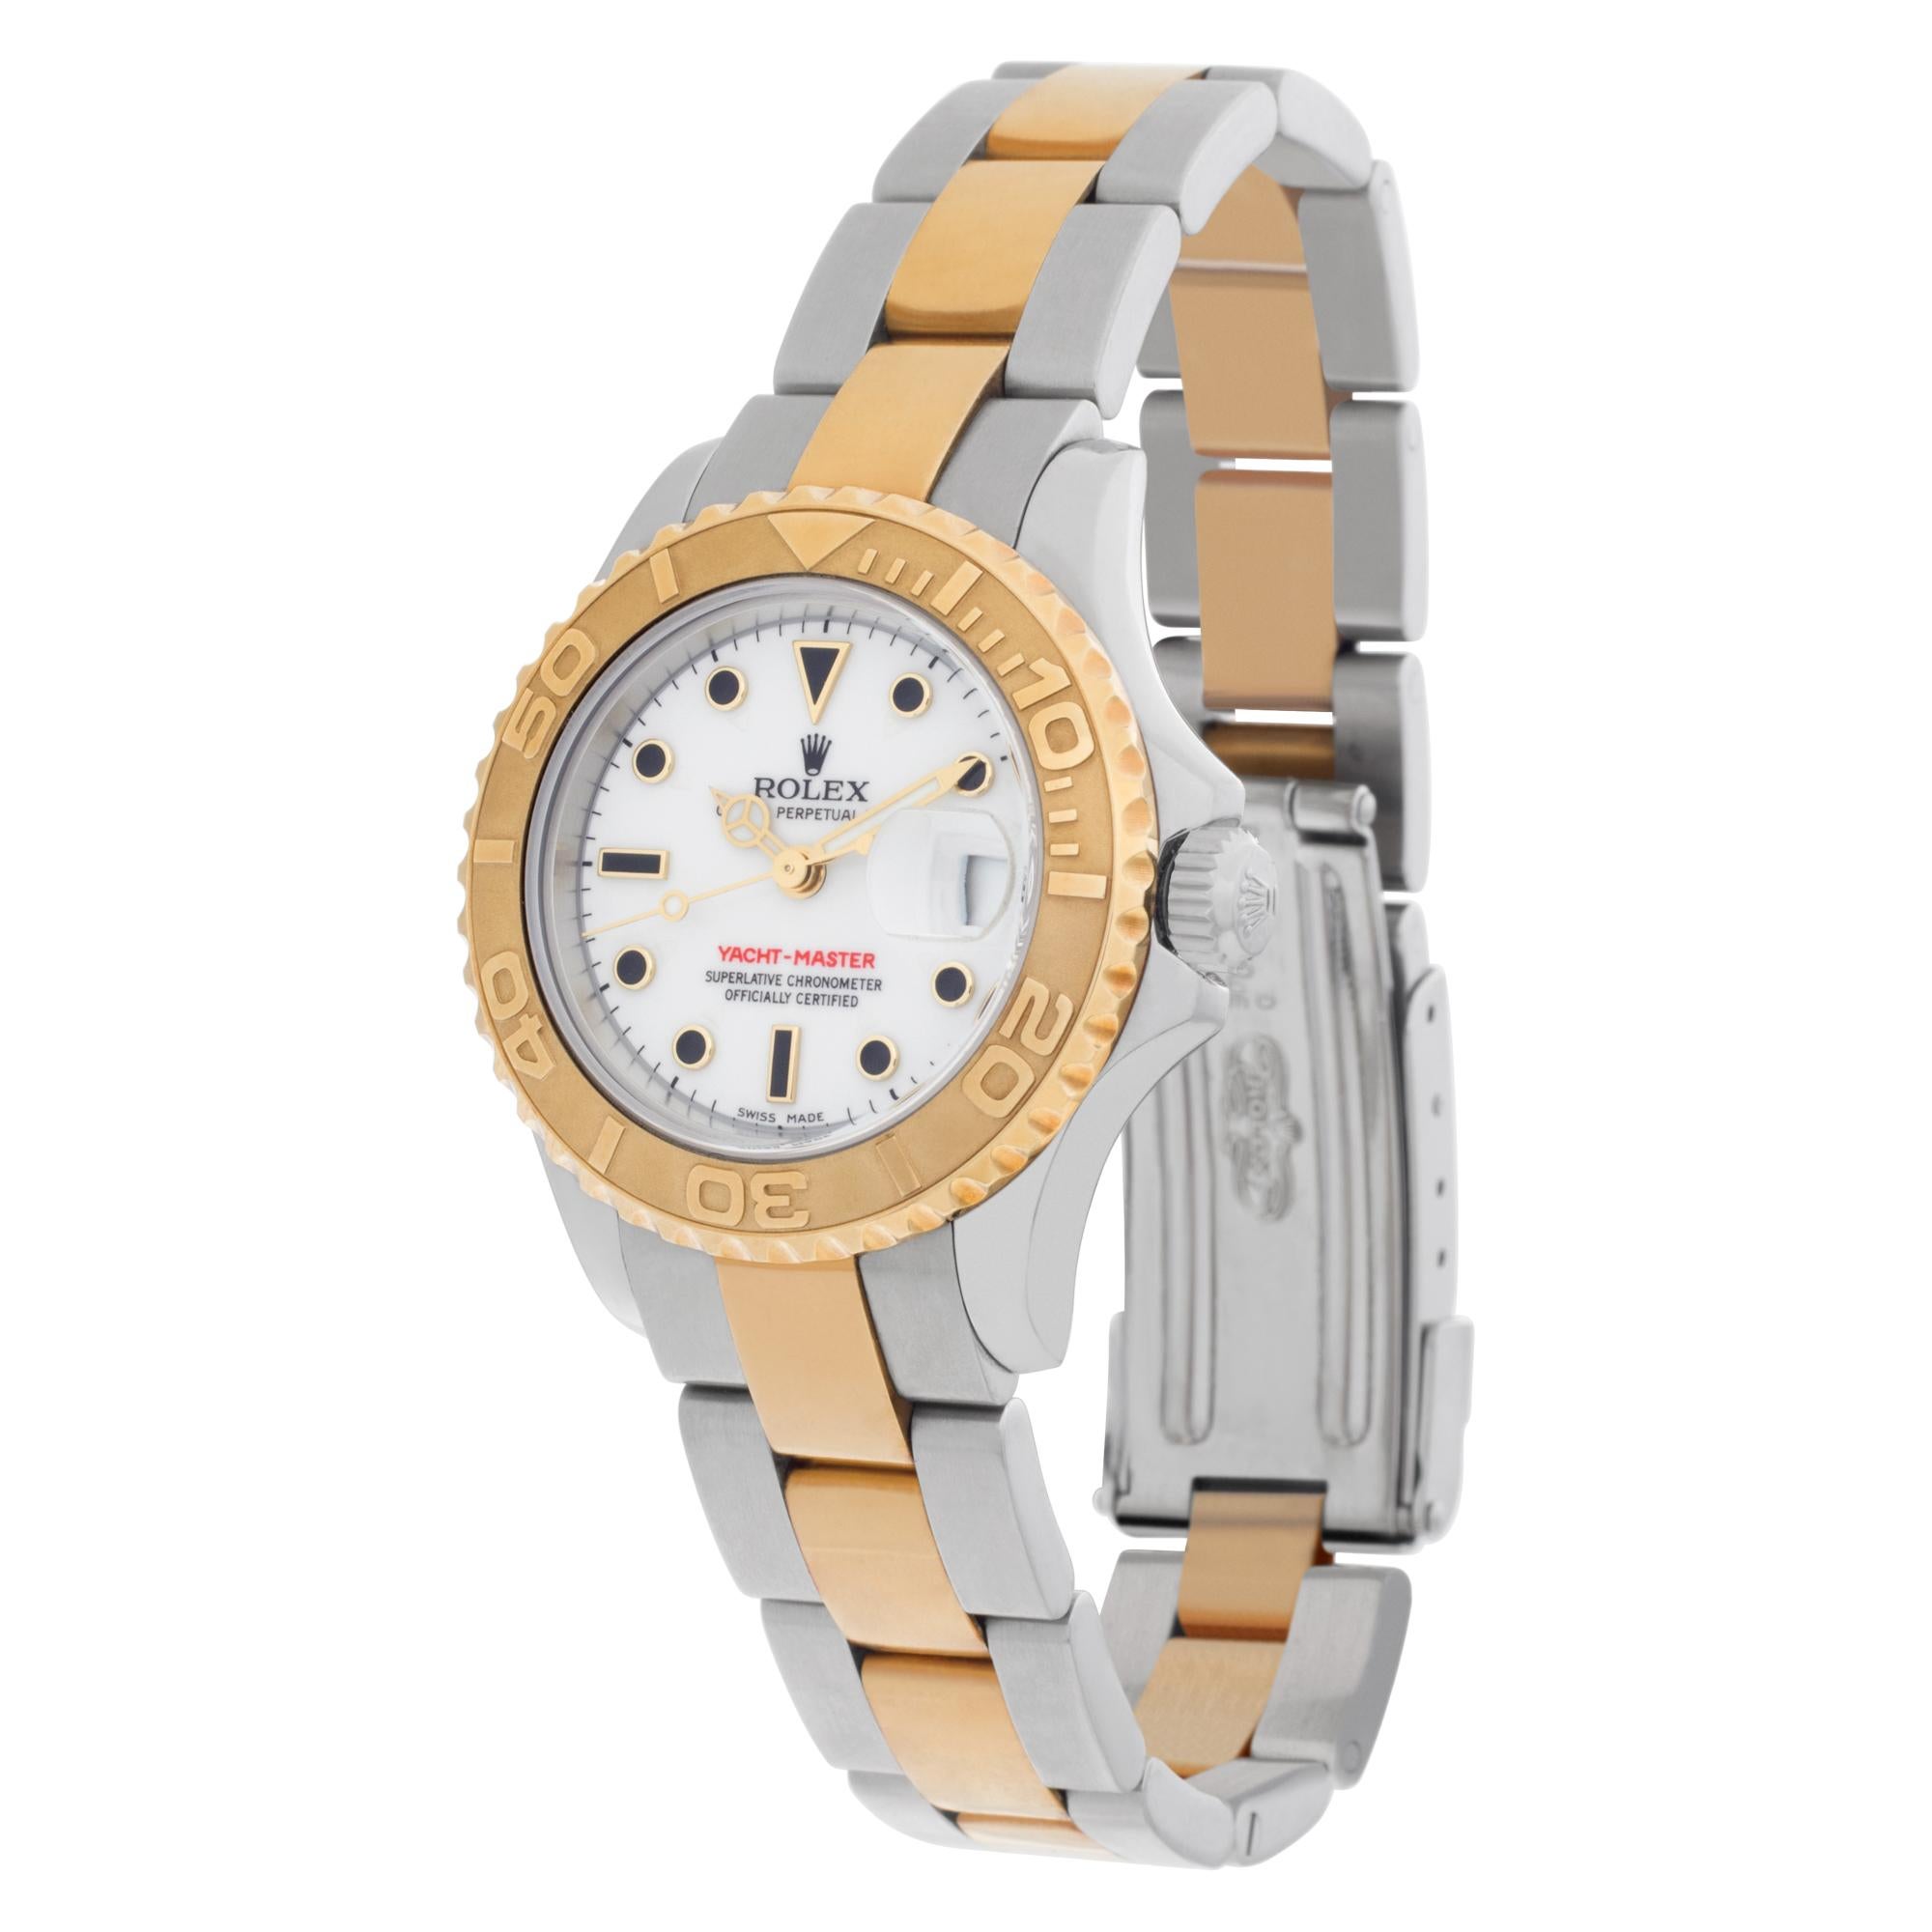 Rolex Yacht-Master in stainless steel & 18k yellow gold. Auto w/ sweep seconds and date. 29 mm case size. With box and papers. **Bank wire only at this price** Ref 169623. Circa 2003. Fine Pre-owned Rolex Watch.

Certified preowned Sport Rolex